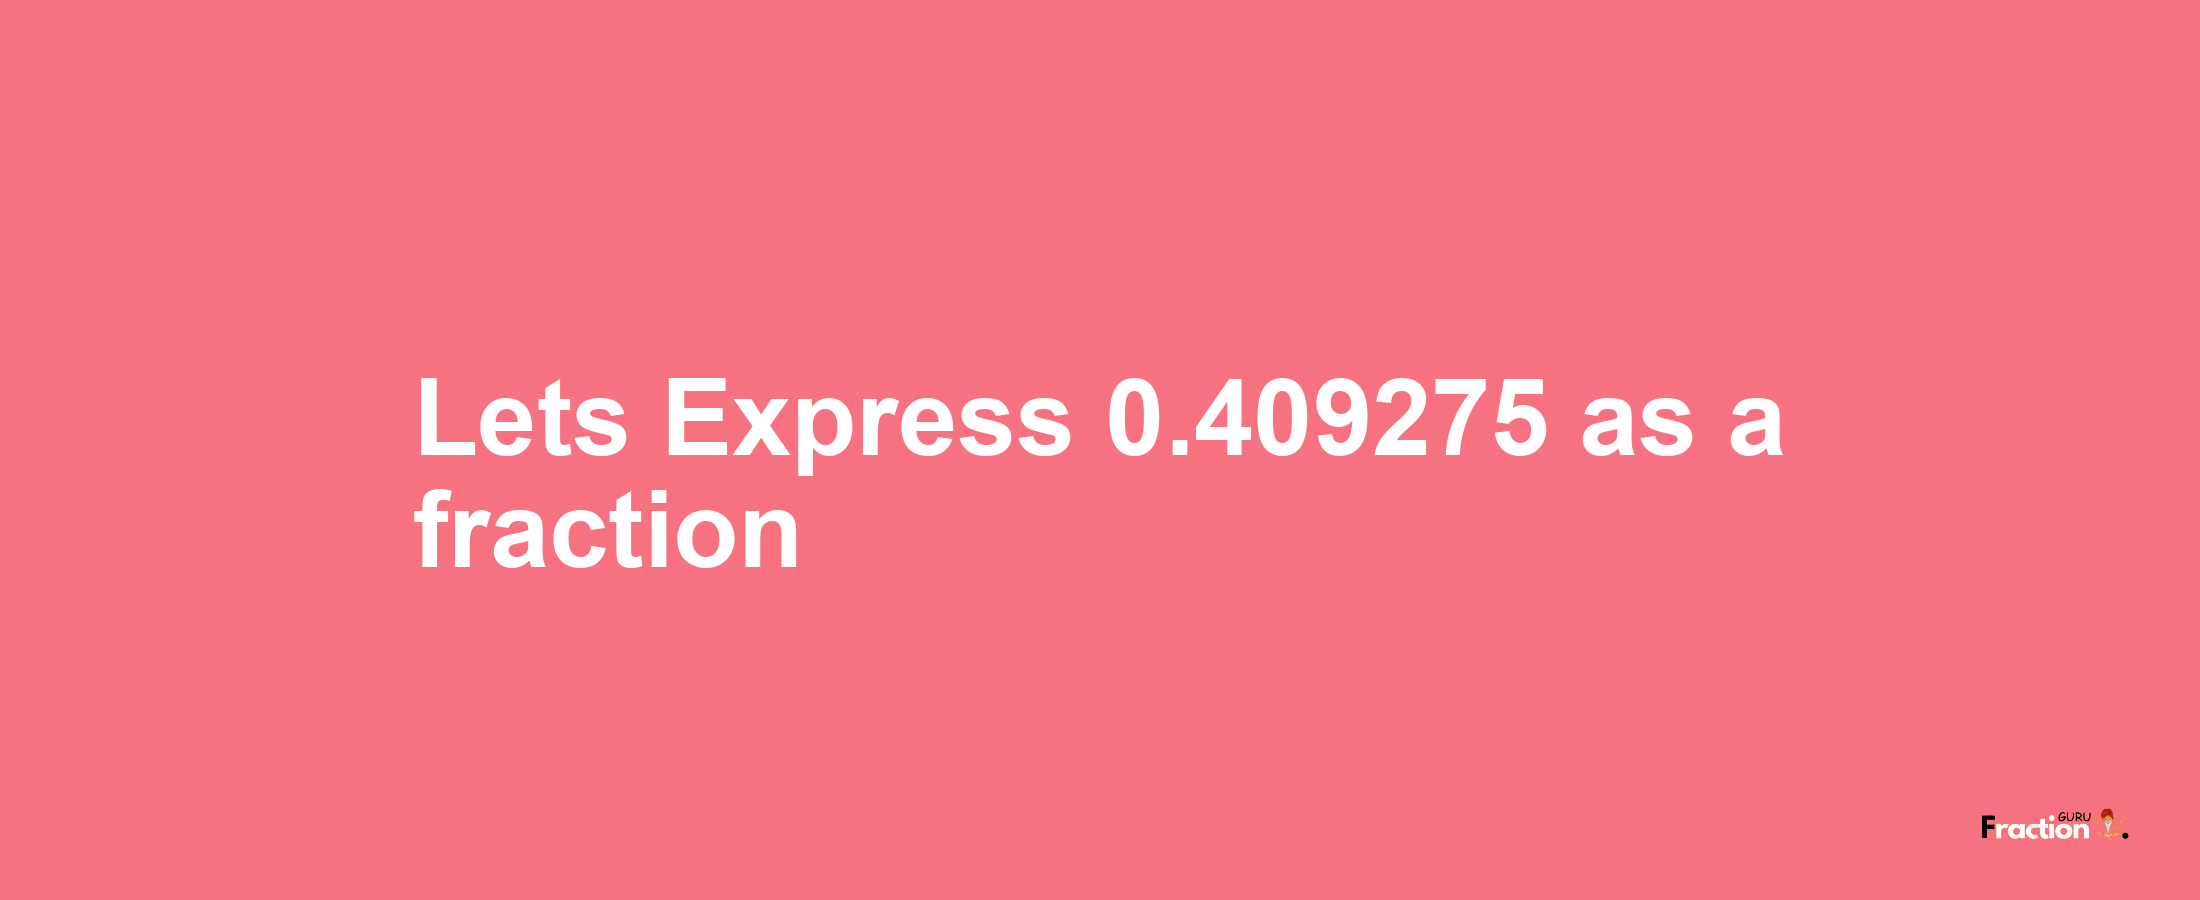 Lets Express 0.409275 as afraction